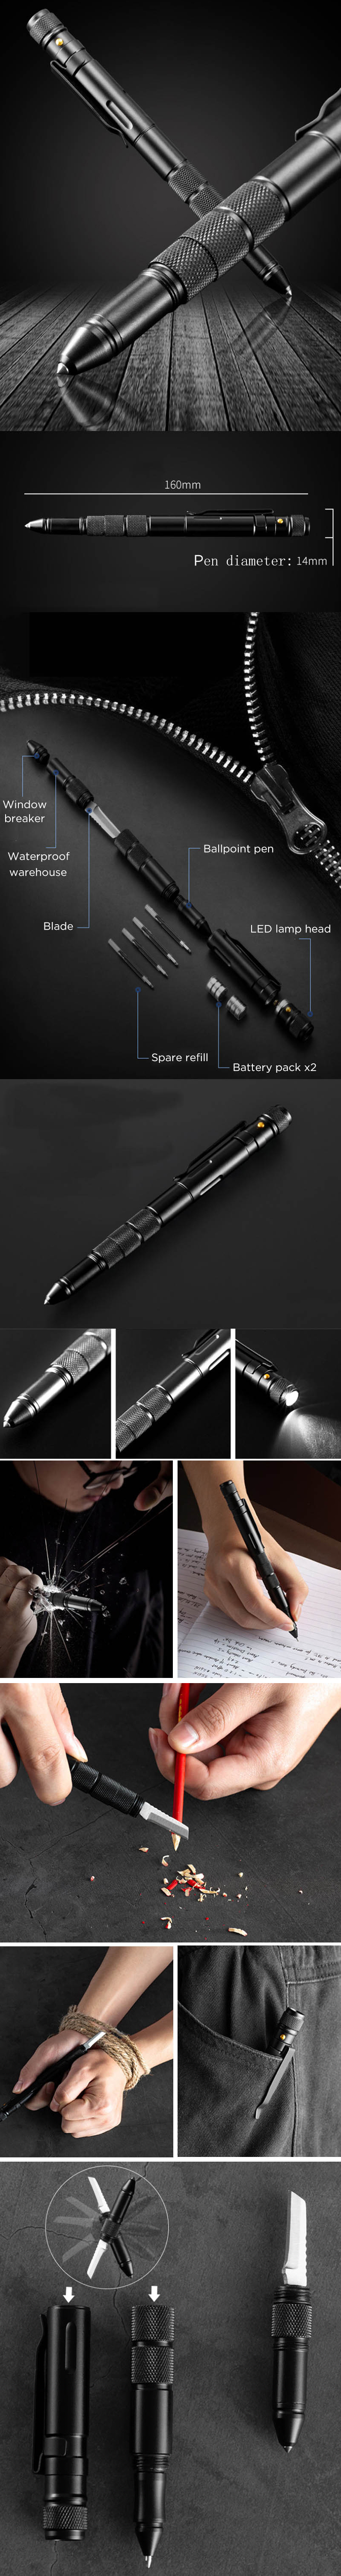 T06 Multi-functional Self Defensive Tactical Pen With Emergency LED Light Whistle Window Glass Breaker Cutter for Outdoor Survival